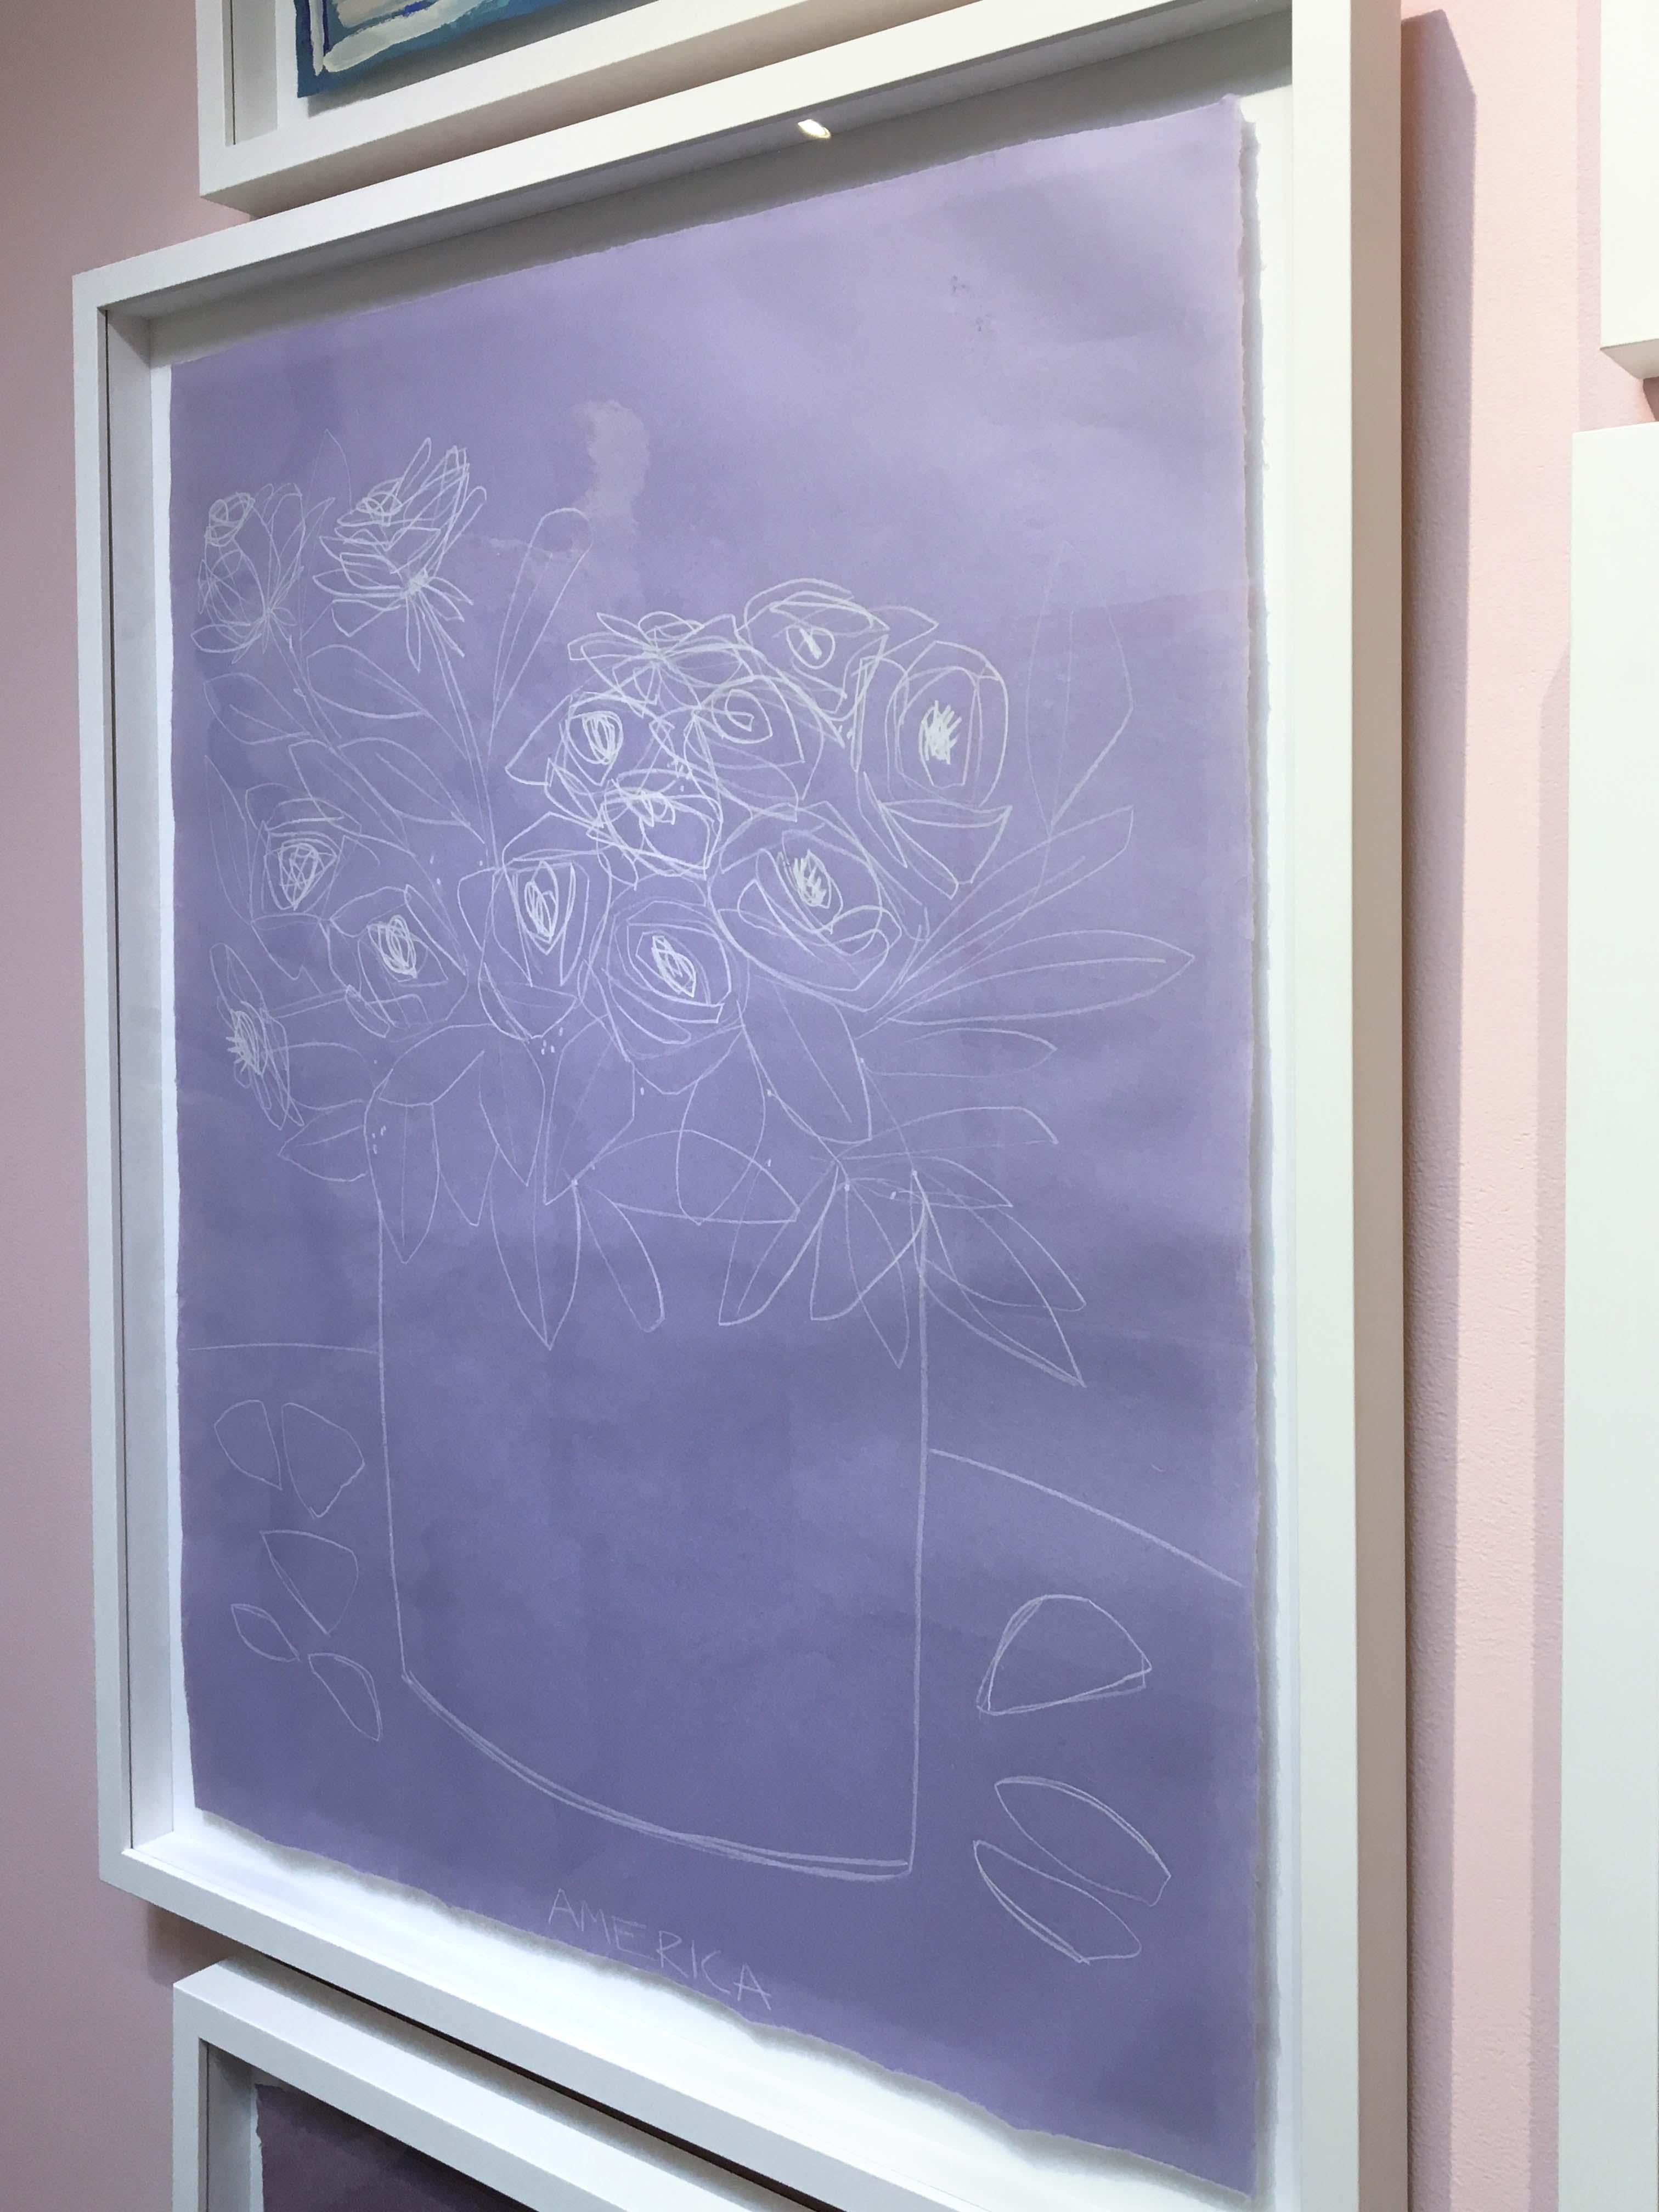 Roses on Violet Paper, America Martin, Pencil on Handmade Paper, 2019 3